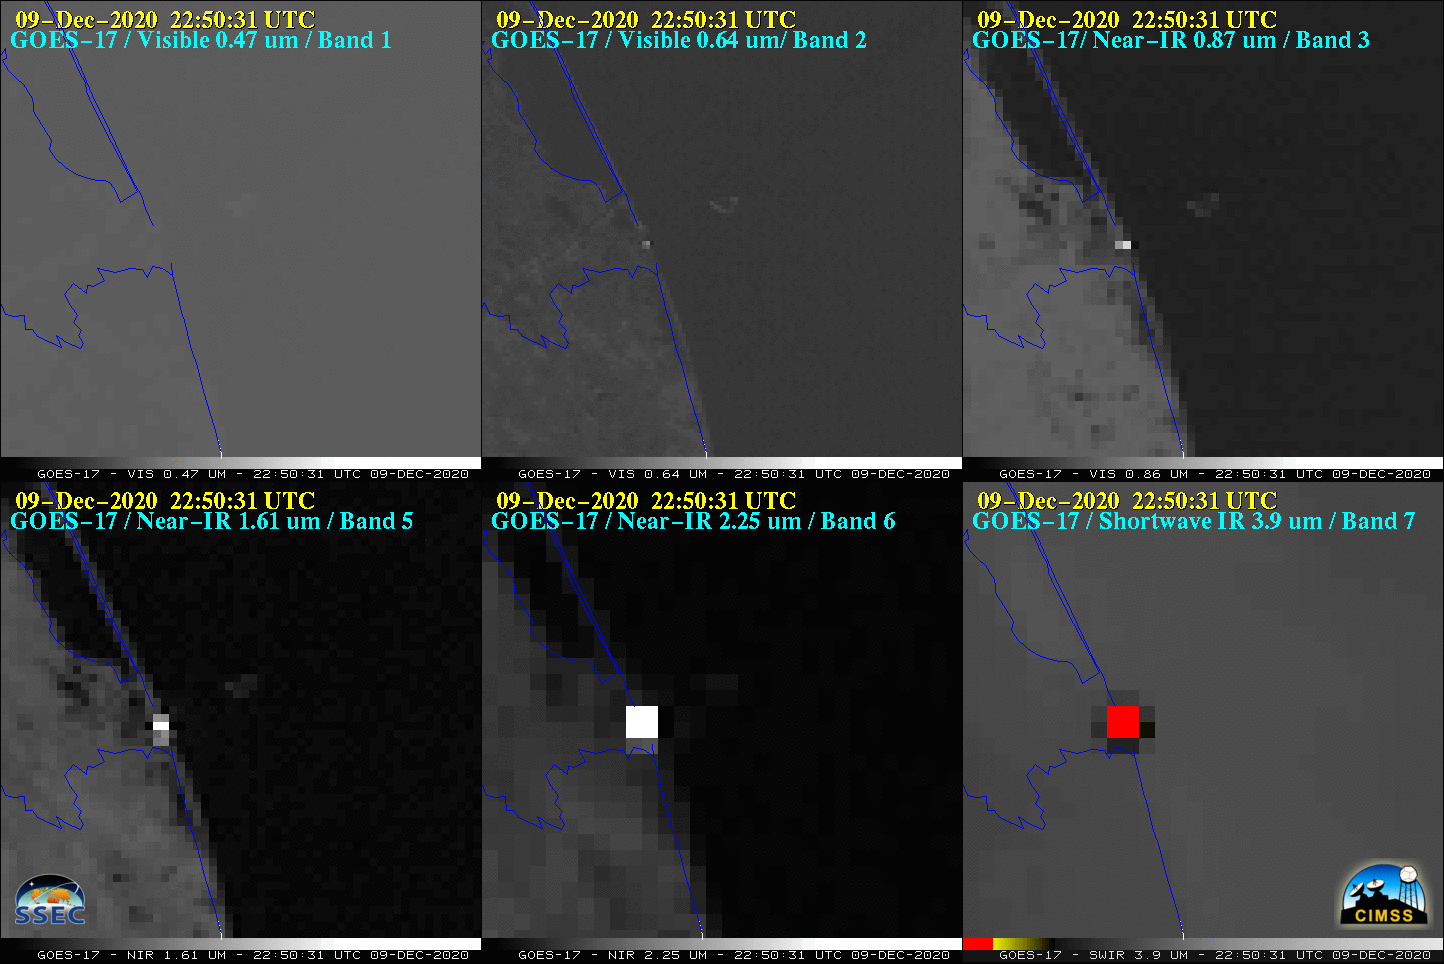 GOES-17 Visible, Near-Infrared and Shortwave Infrared images [click to play animation | MP4]